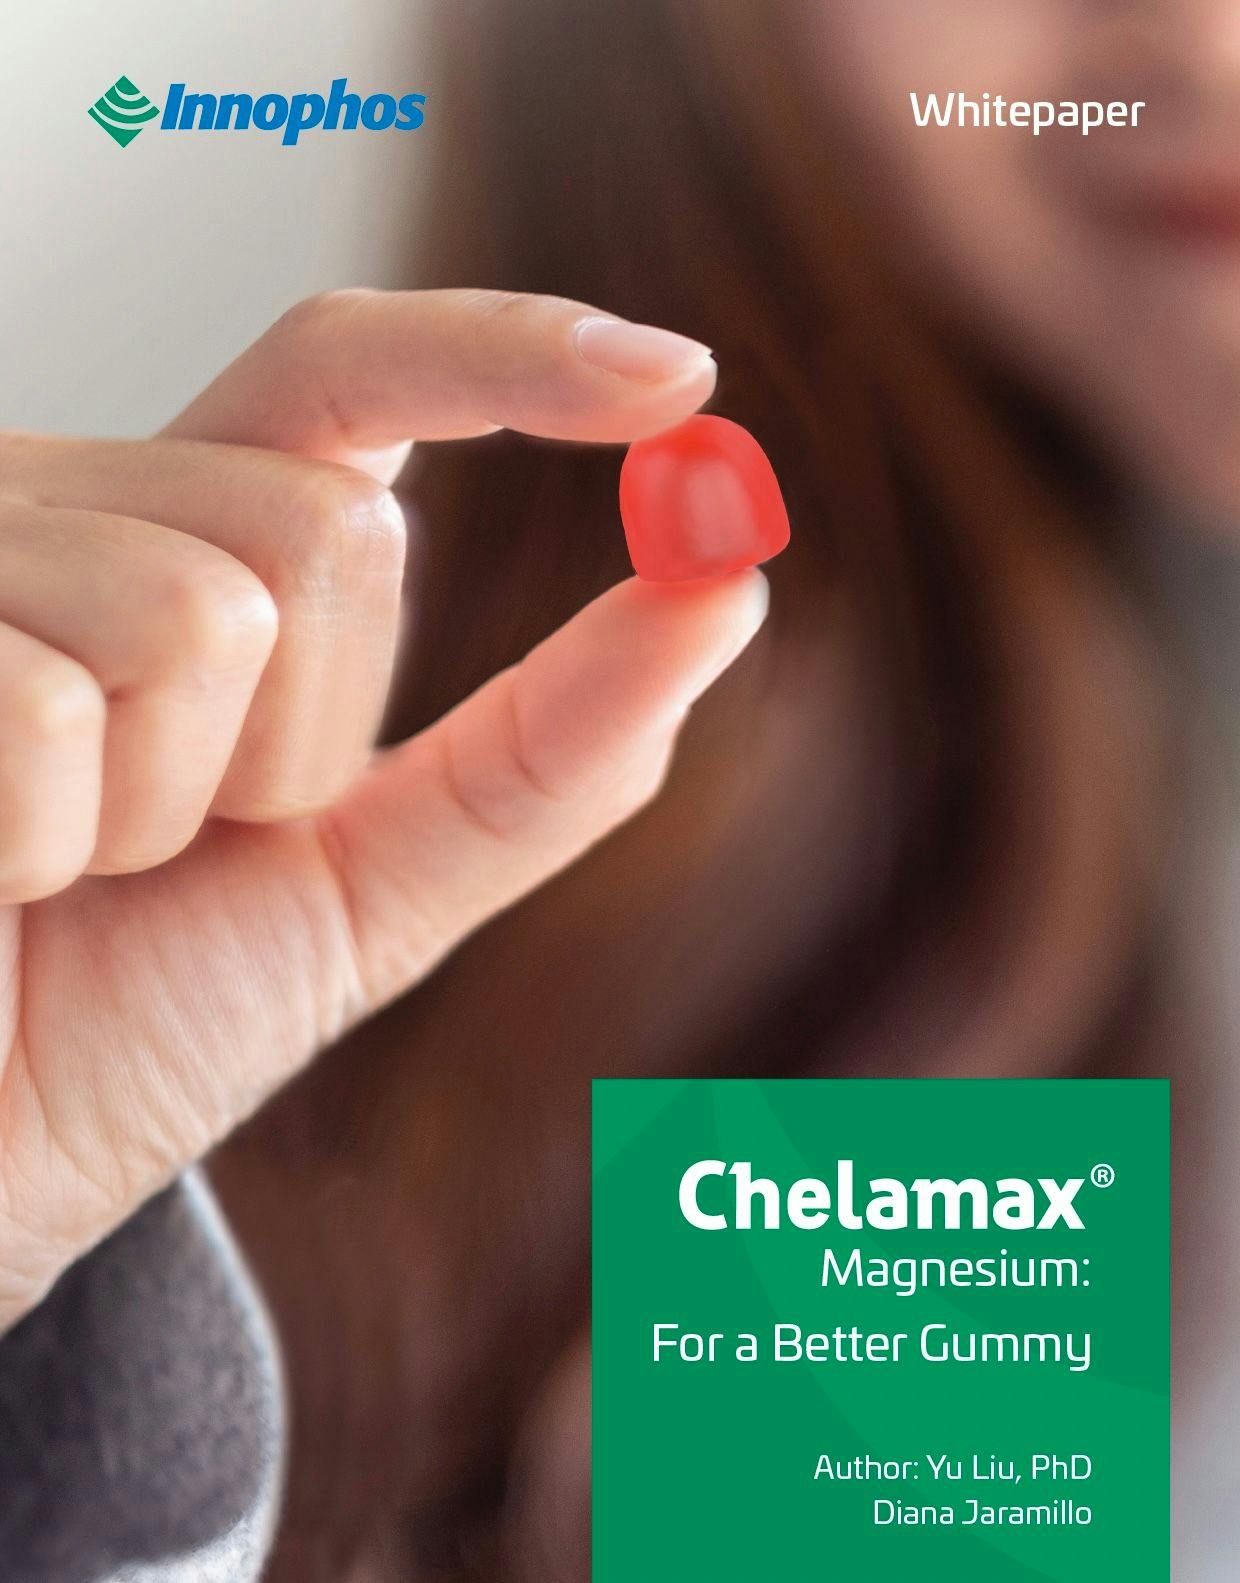 Innophos’s Chelamax chelated magnesium citrate outperformed some other magnesium ingredients in pectin-based gummy supplements, firm says